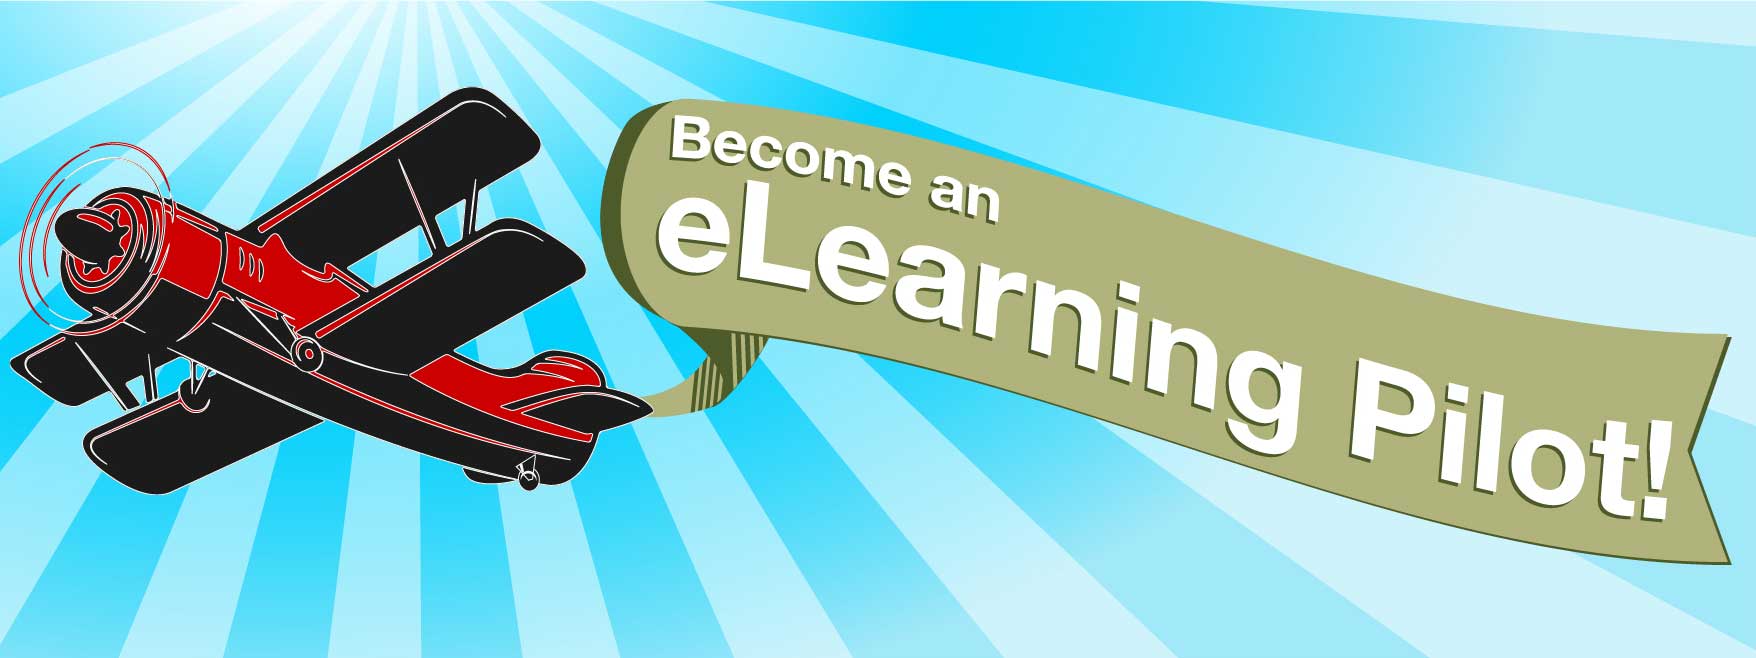 eLearning Pilot Program image with plane and banner